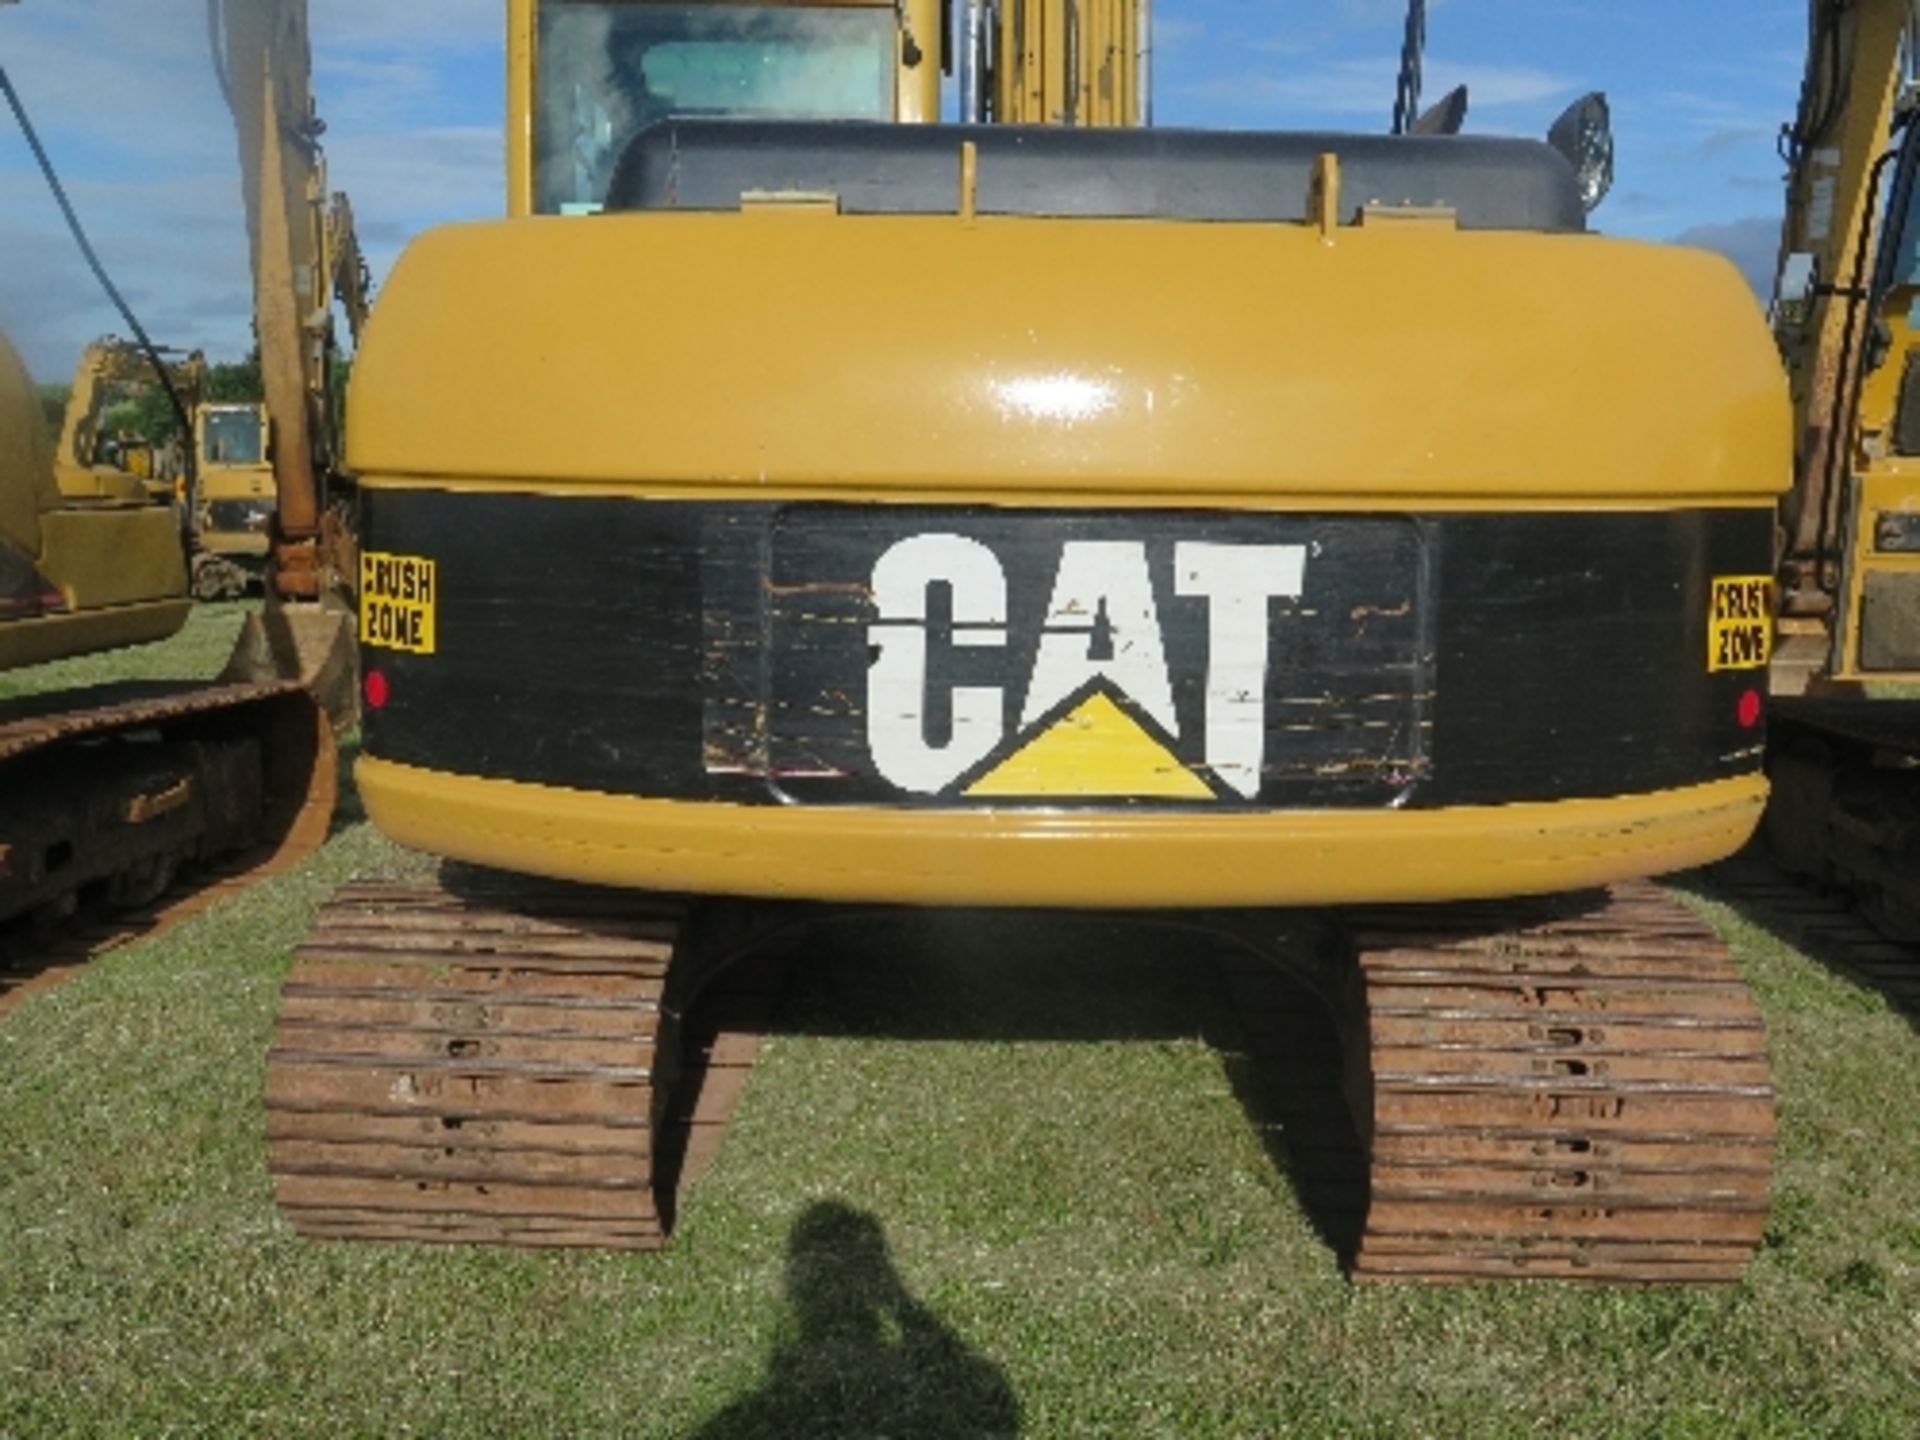 Caterpillar 312C excavator 4972 hrs 2007 145520
POOR LEFT HAND TRACKING IN REVERSE
ALL LOTS are - Image 2 of 8